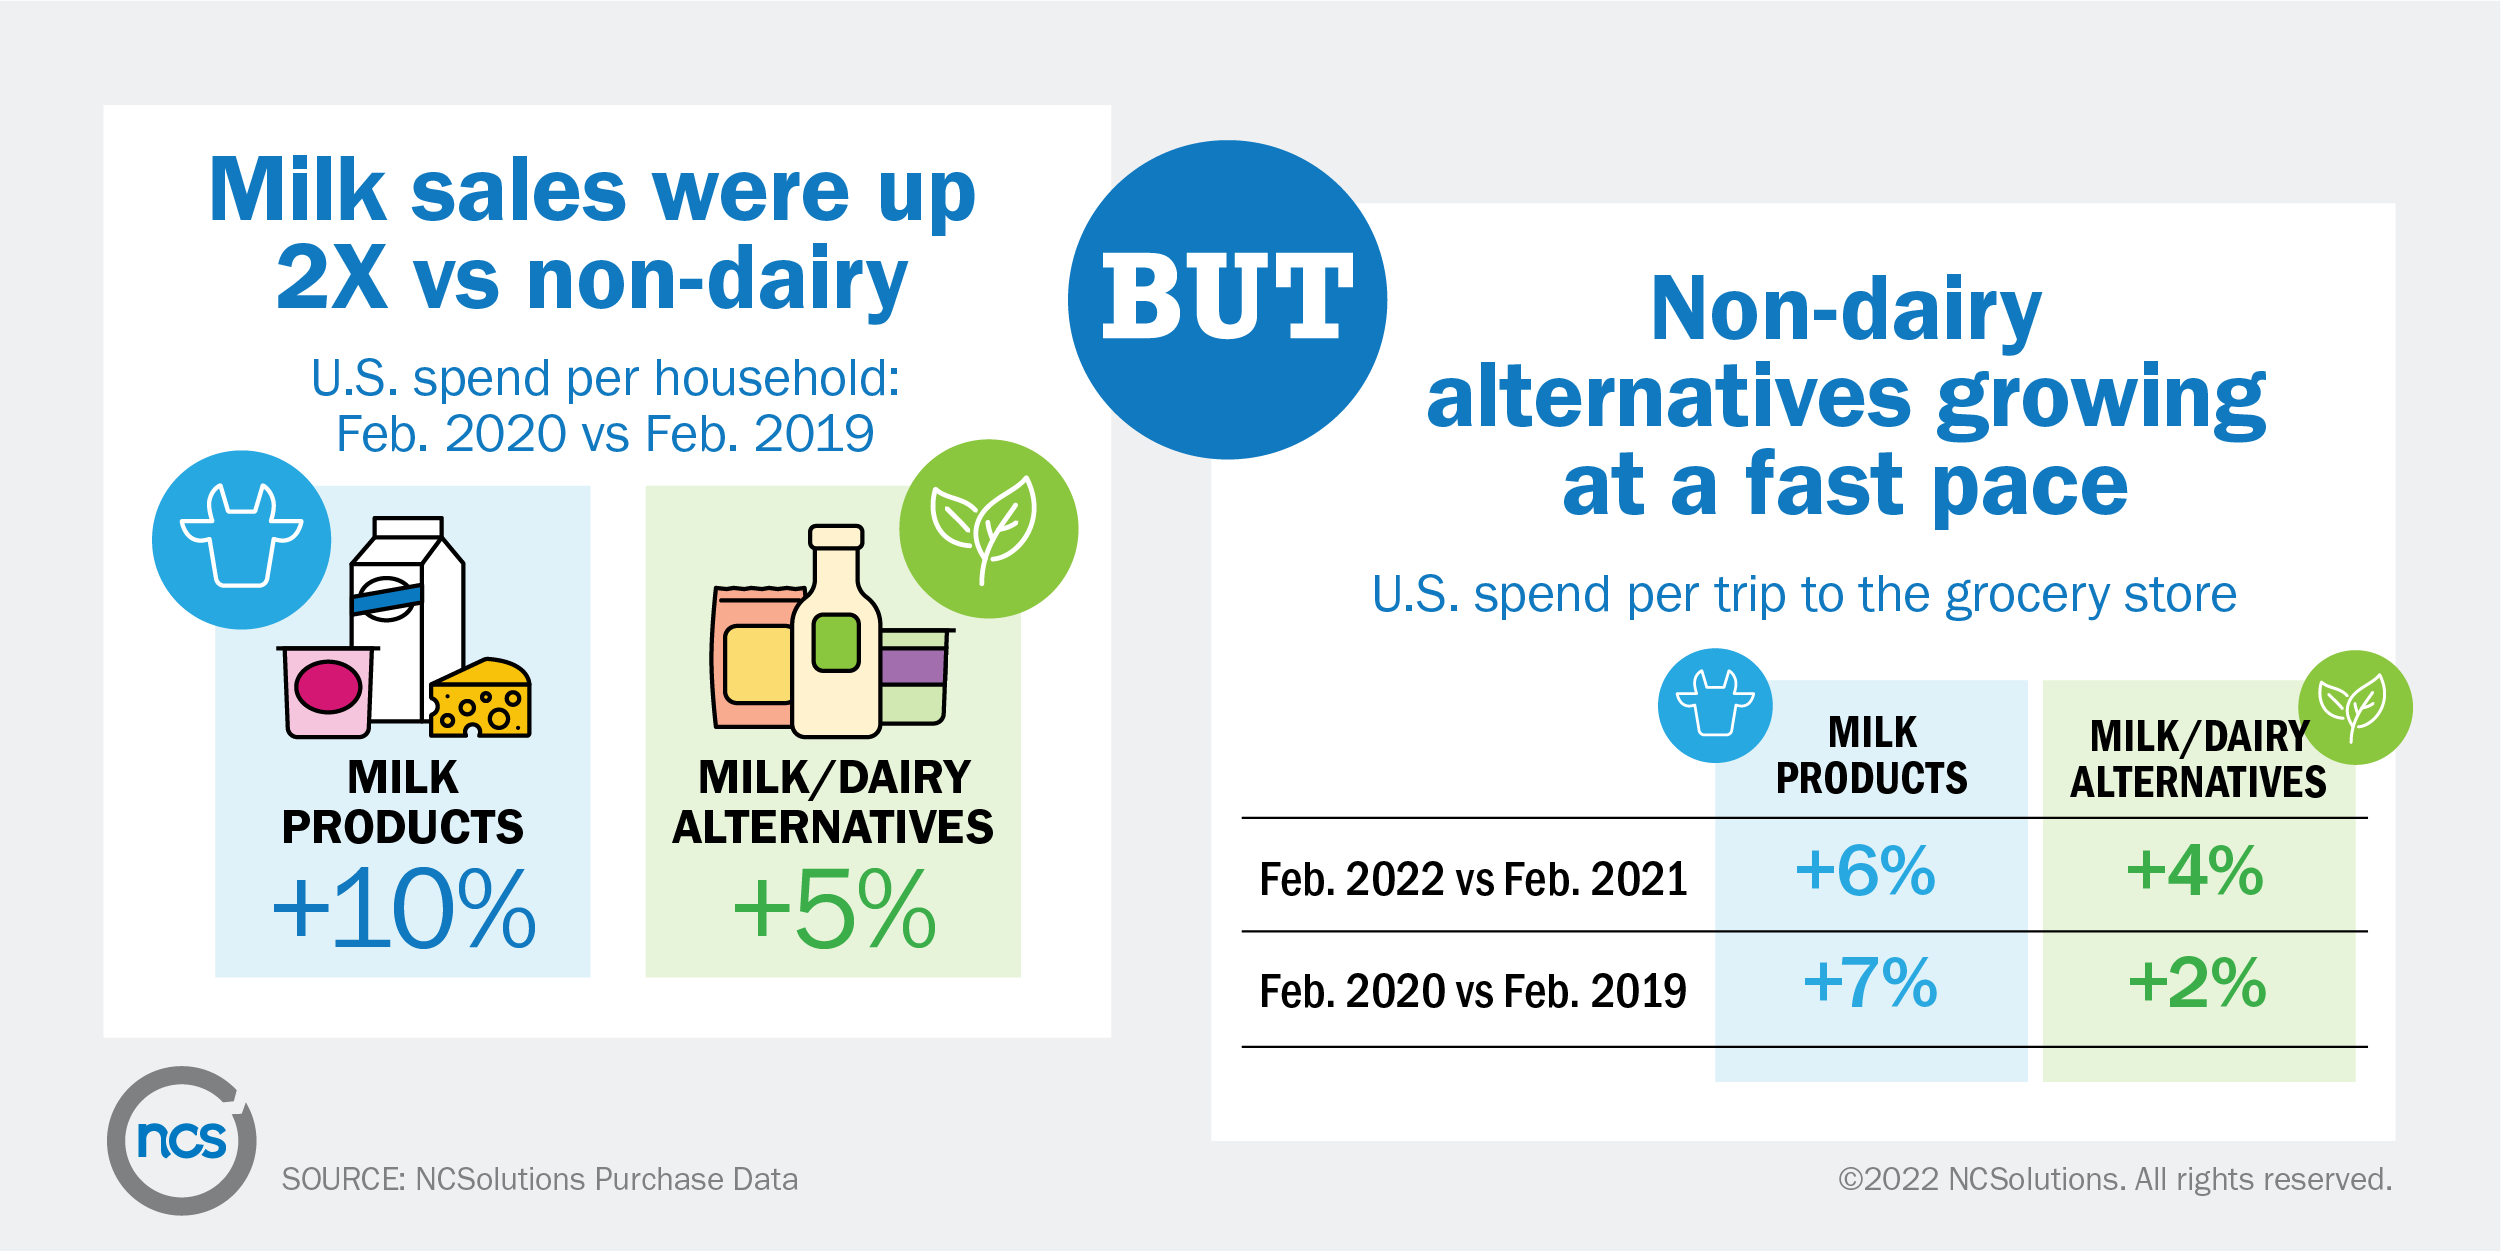 NCS shows milk sales were up but now non-dairy sales are increasing